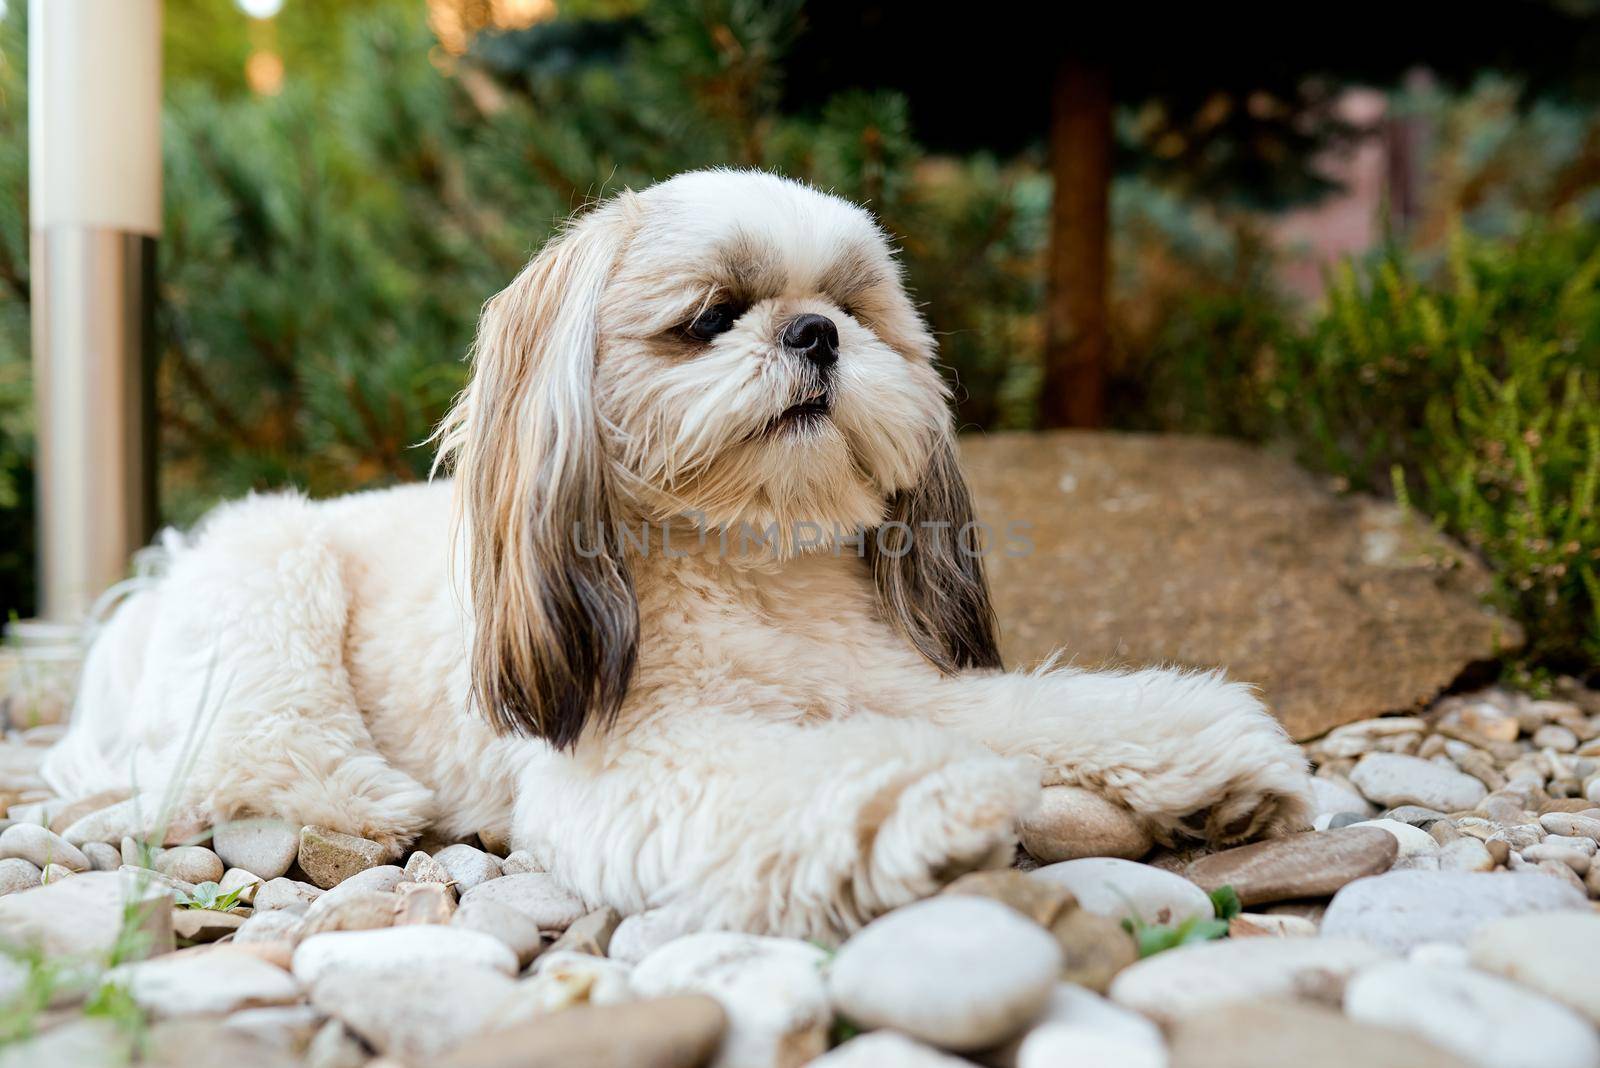 Shih tzu dog in garden with flowers on white rocks . High quality photo